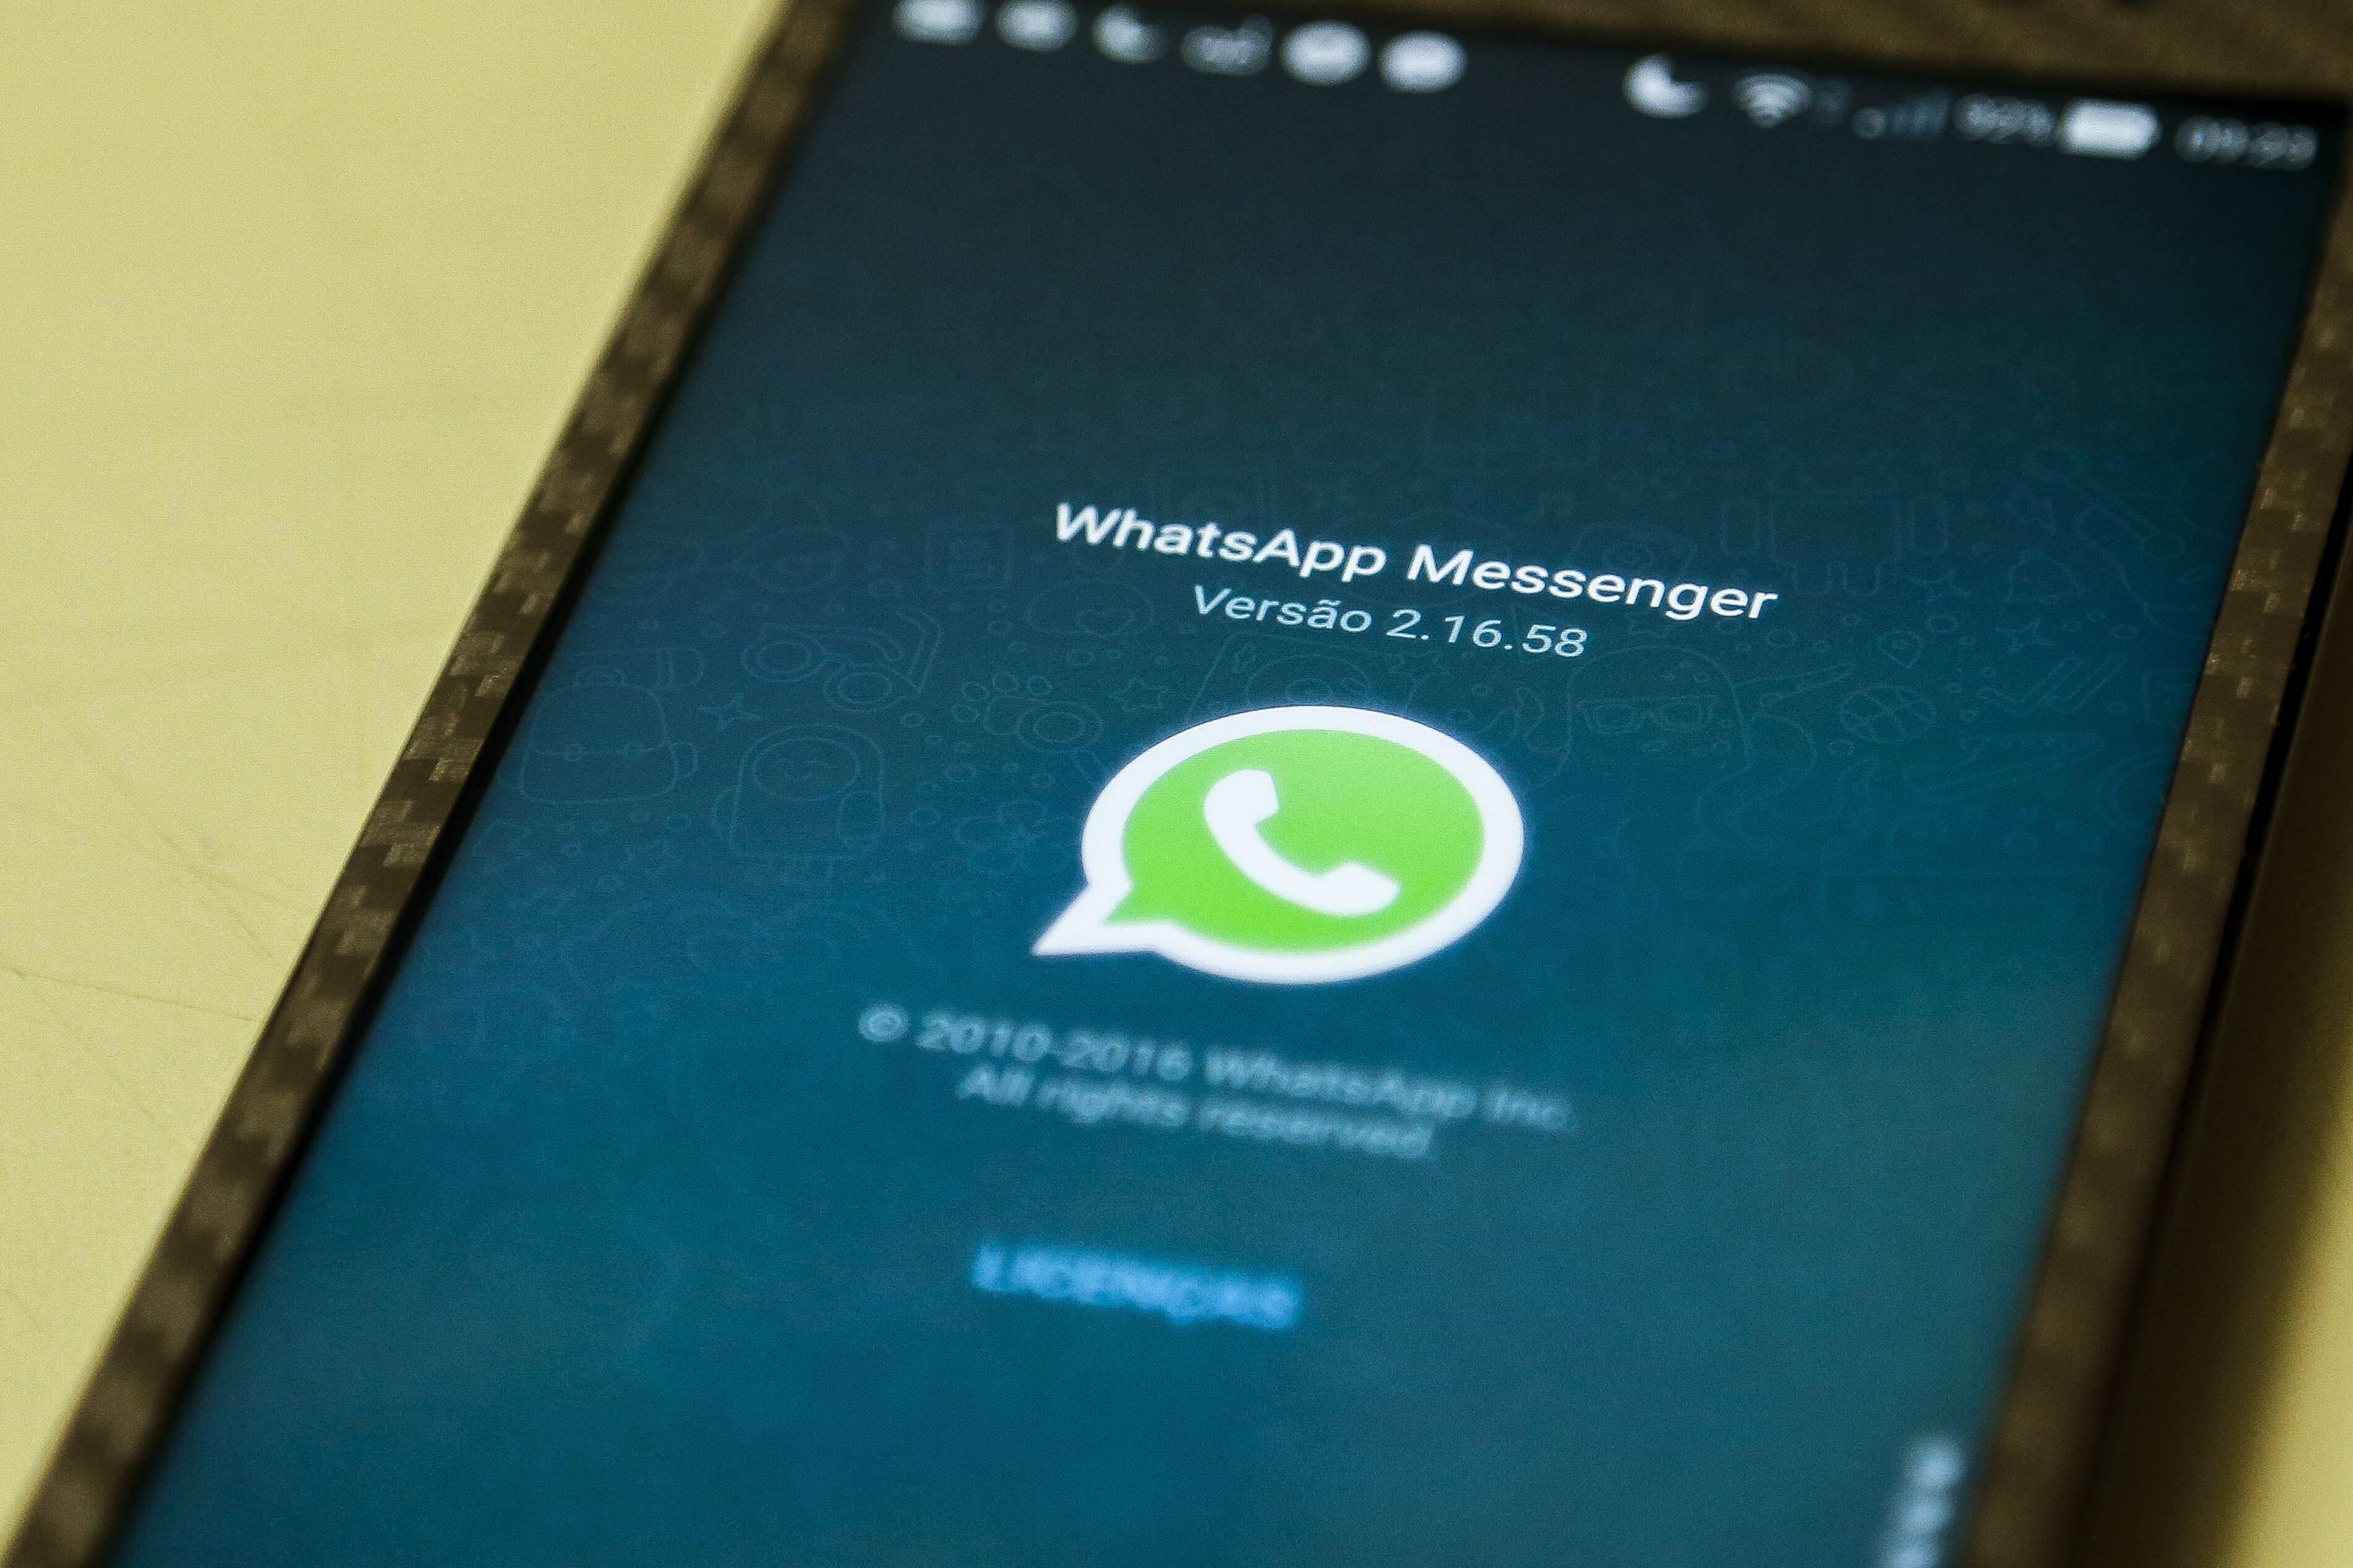 How WhatsApp Client Development Can Be Achieved